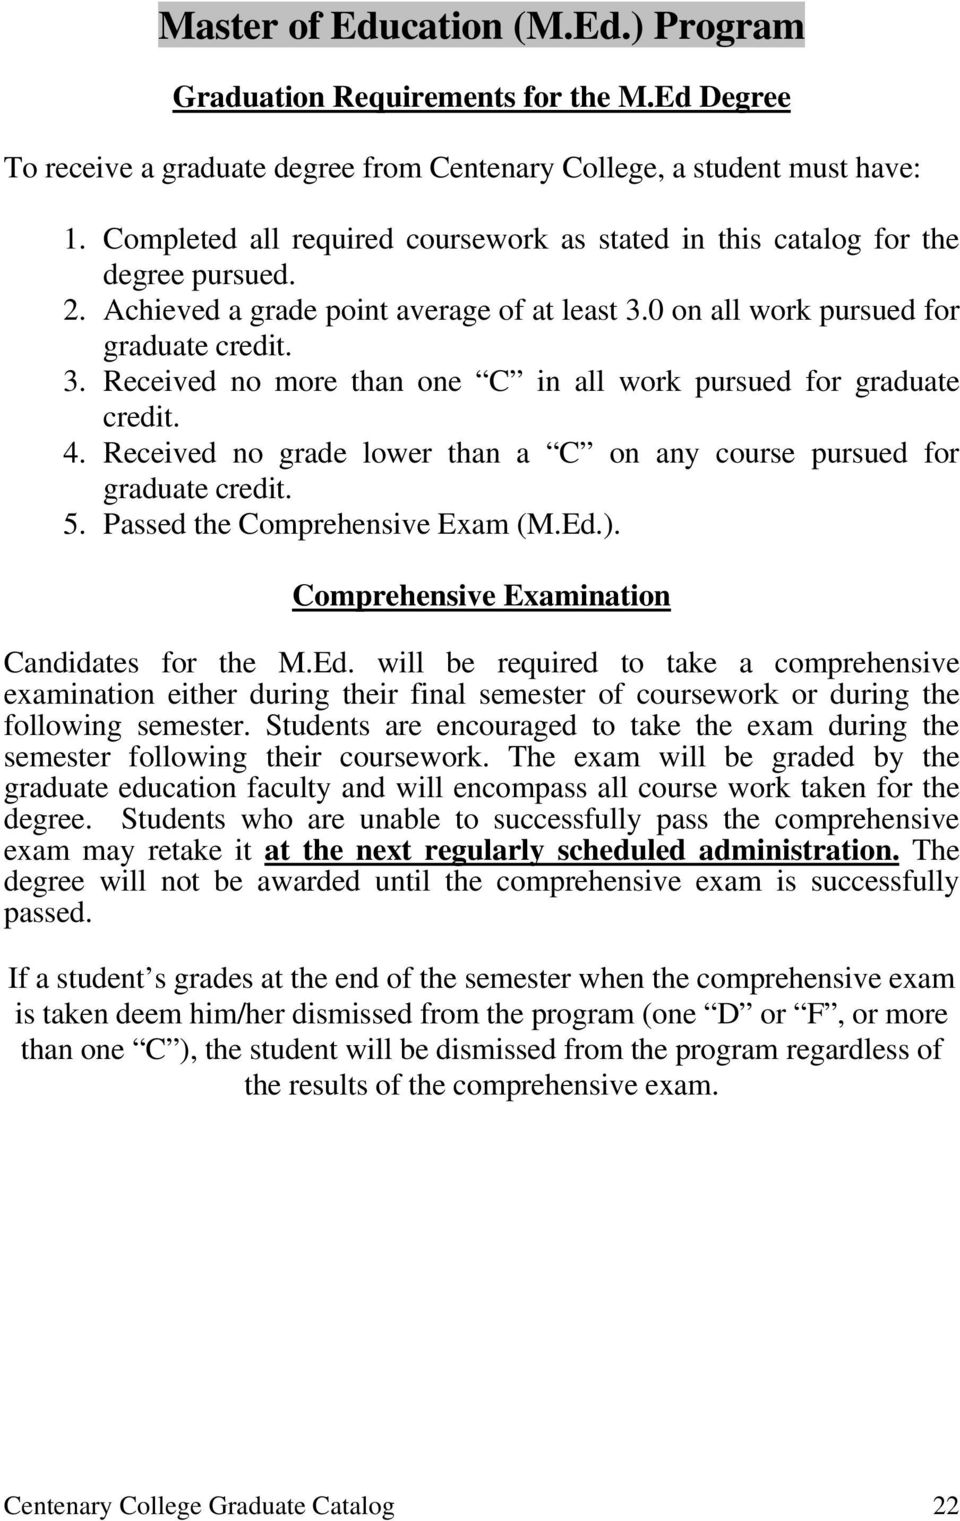 0 on all work pursued for graduate credit. 3. Received no more than one C in all work pursued for graduate credit. 4. Received no grade lower than a C on any course pursued for graduate credit. 5.